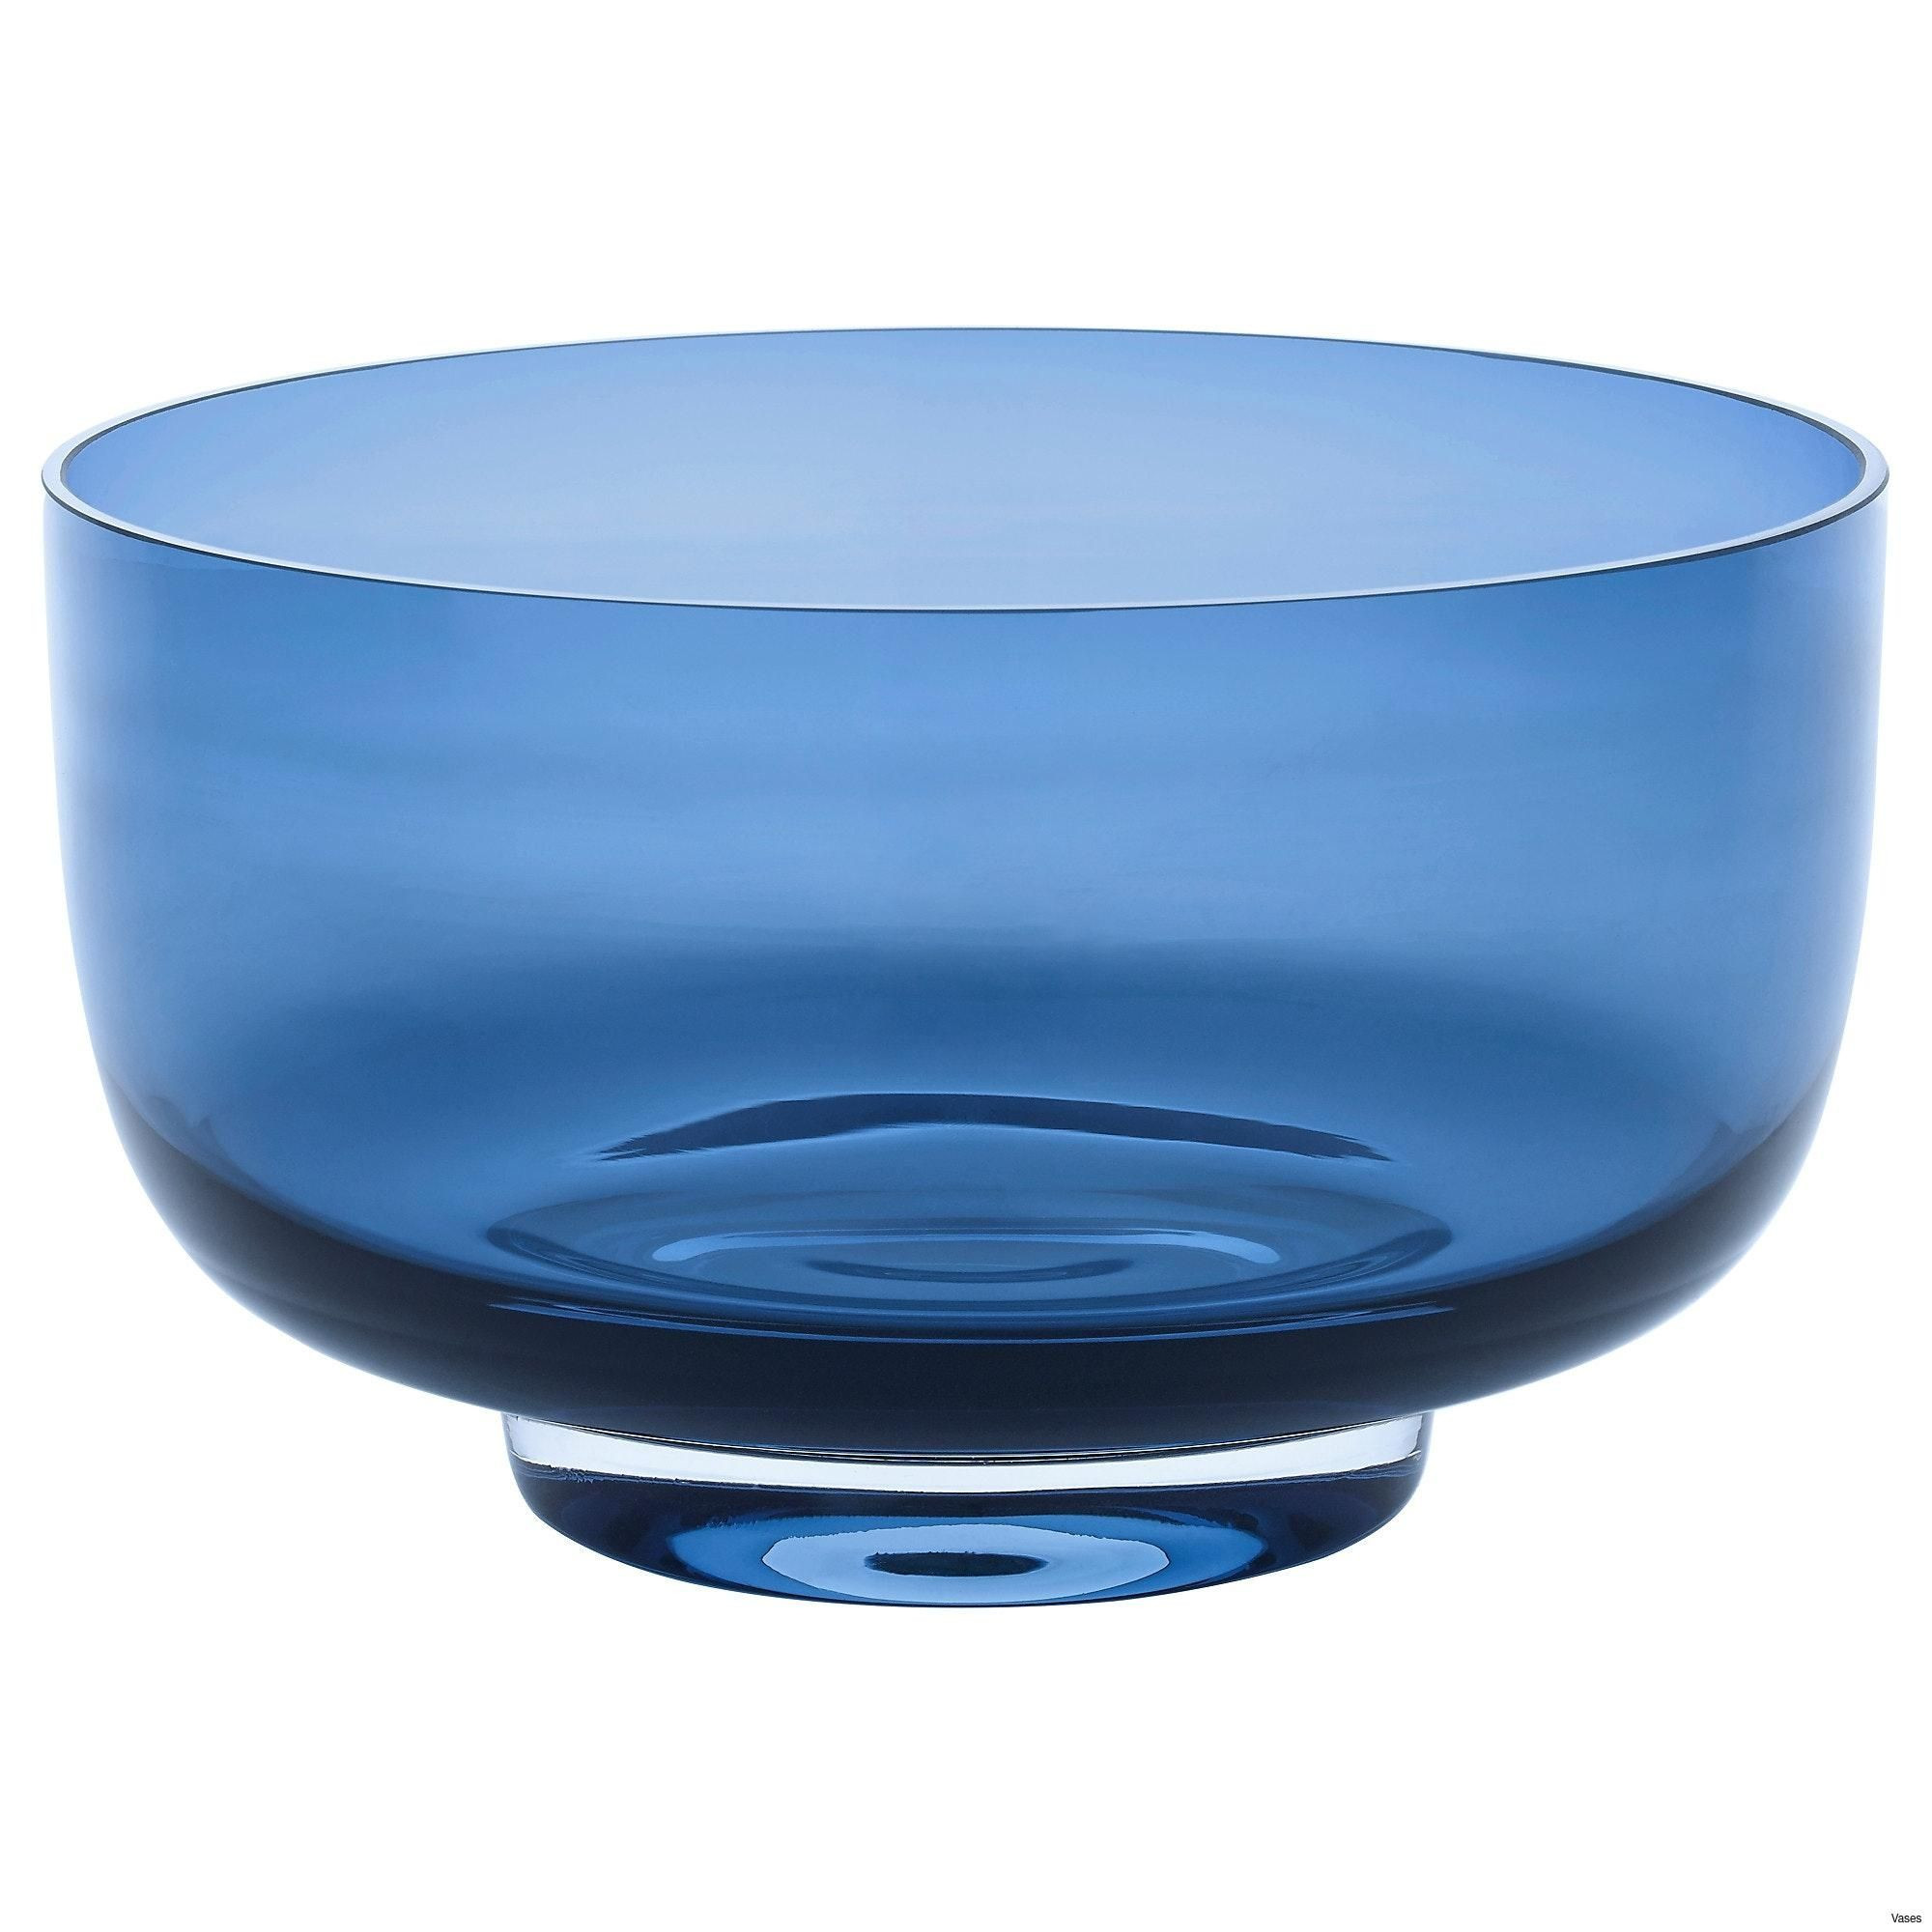 18 Stunning Ikea Glass Flower Vases 2024 free download ikea glass flower vases of blue crystal vase unique decorative glass bowl new living room ikea pertaining to blue crystal vase unique decorative glass bowl new living room ikea vases awesome